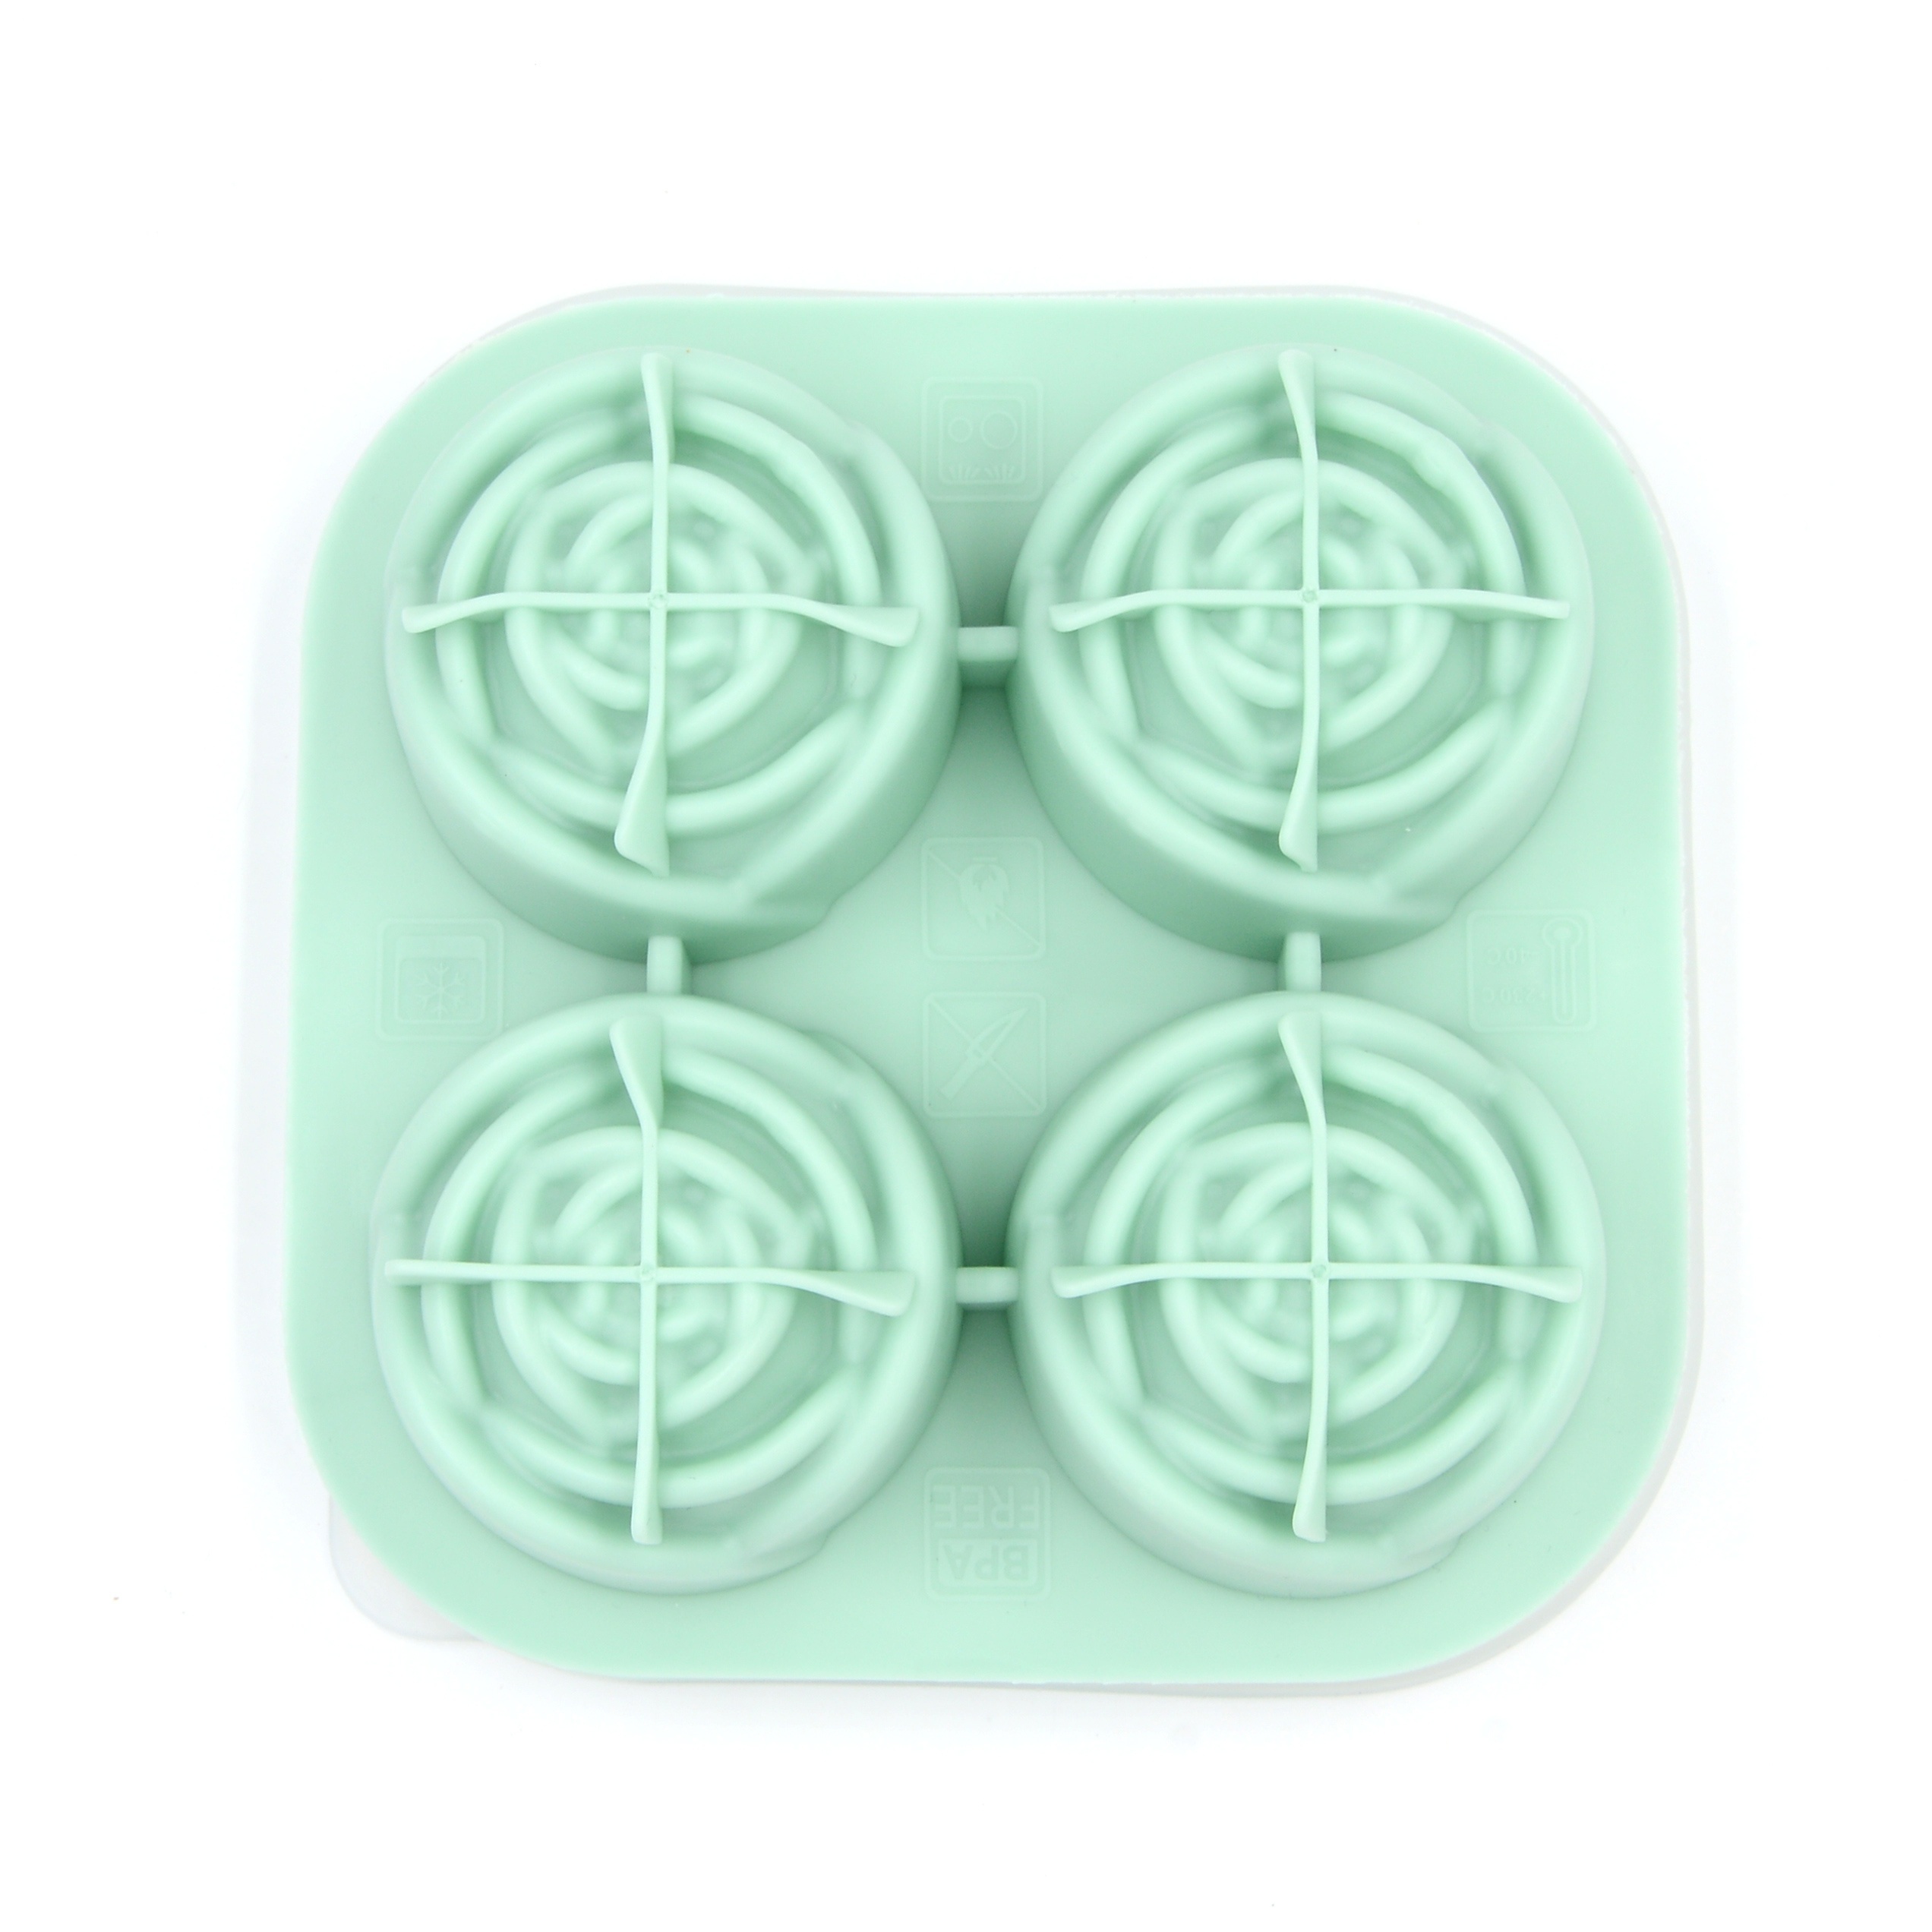 Frogued Ice Ball Mold Drain Hole Design Easy Demoulding Rose Rhombus Shape  Combination Ice Mold Home Supplies (1pc,S)